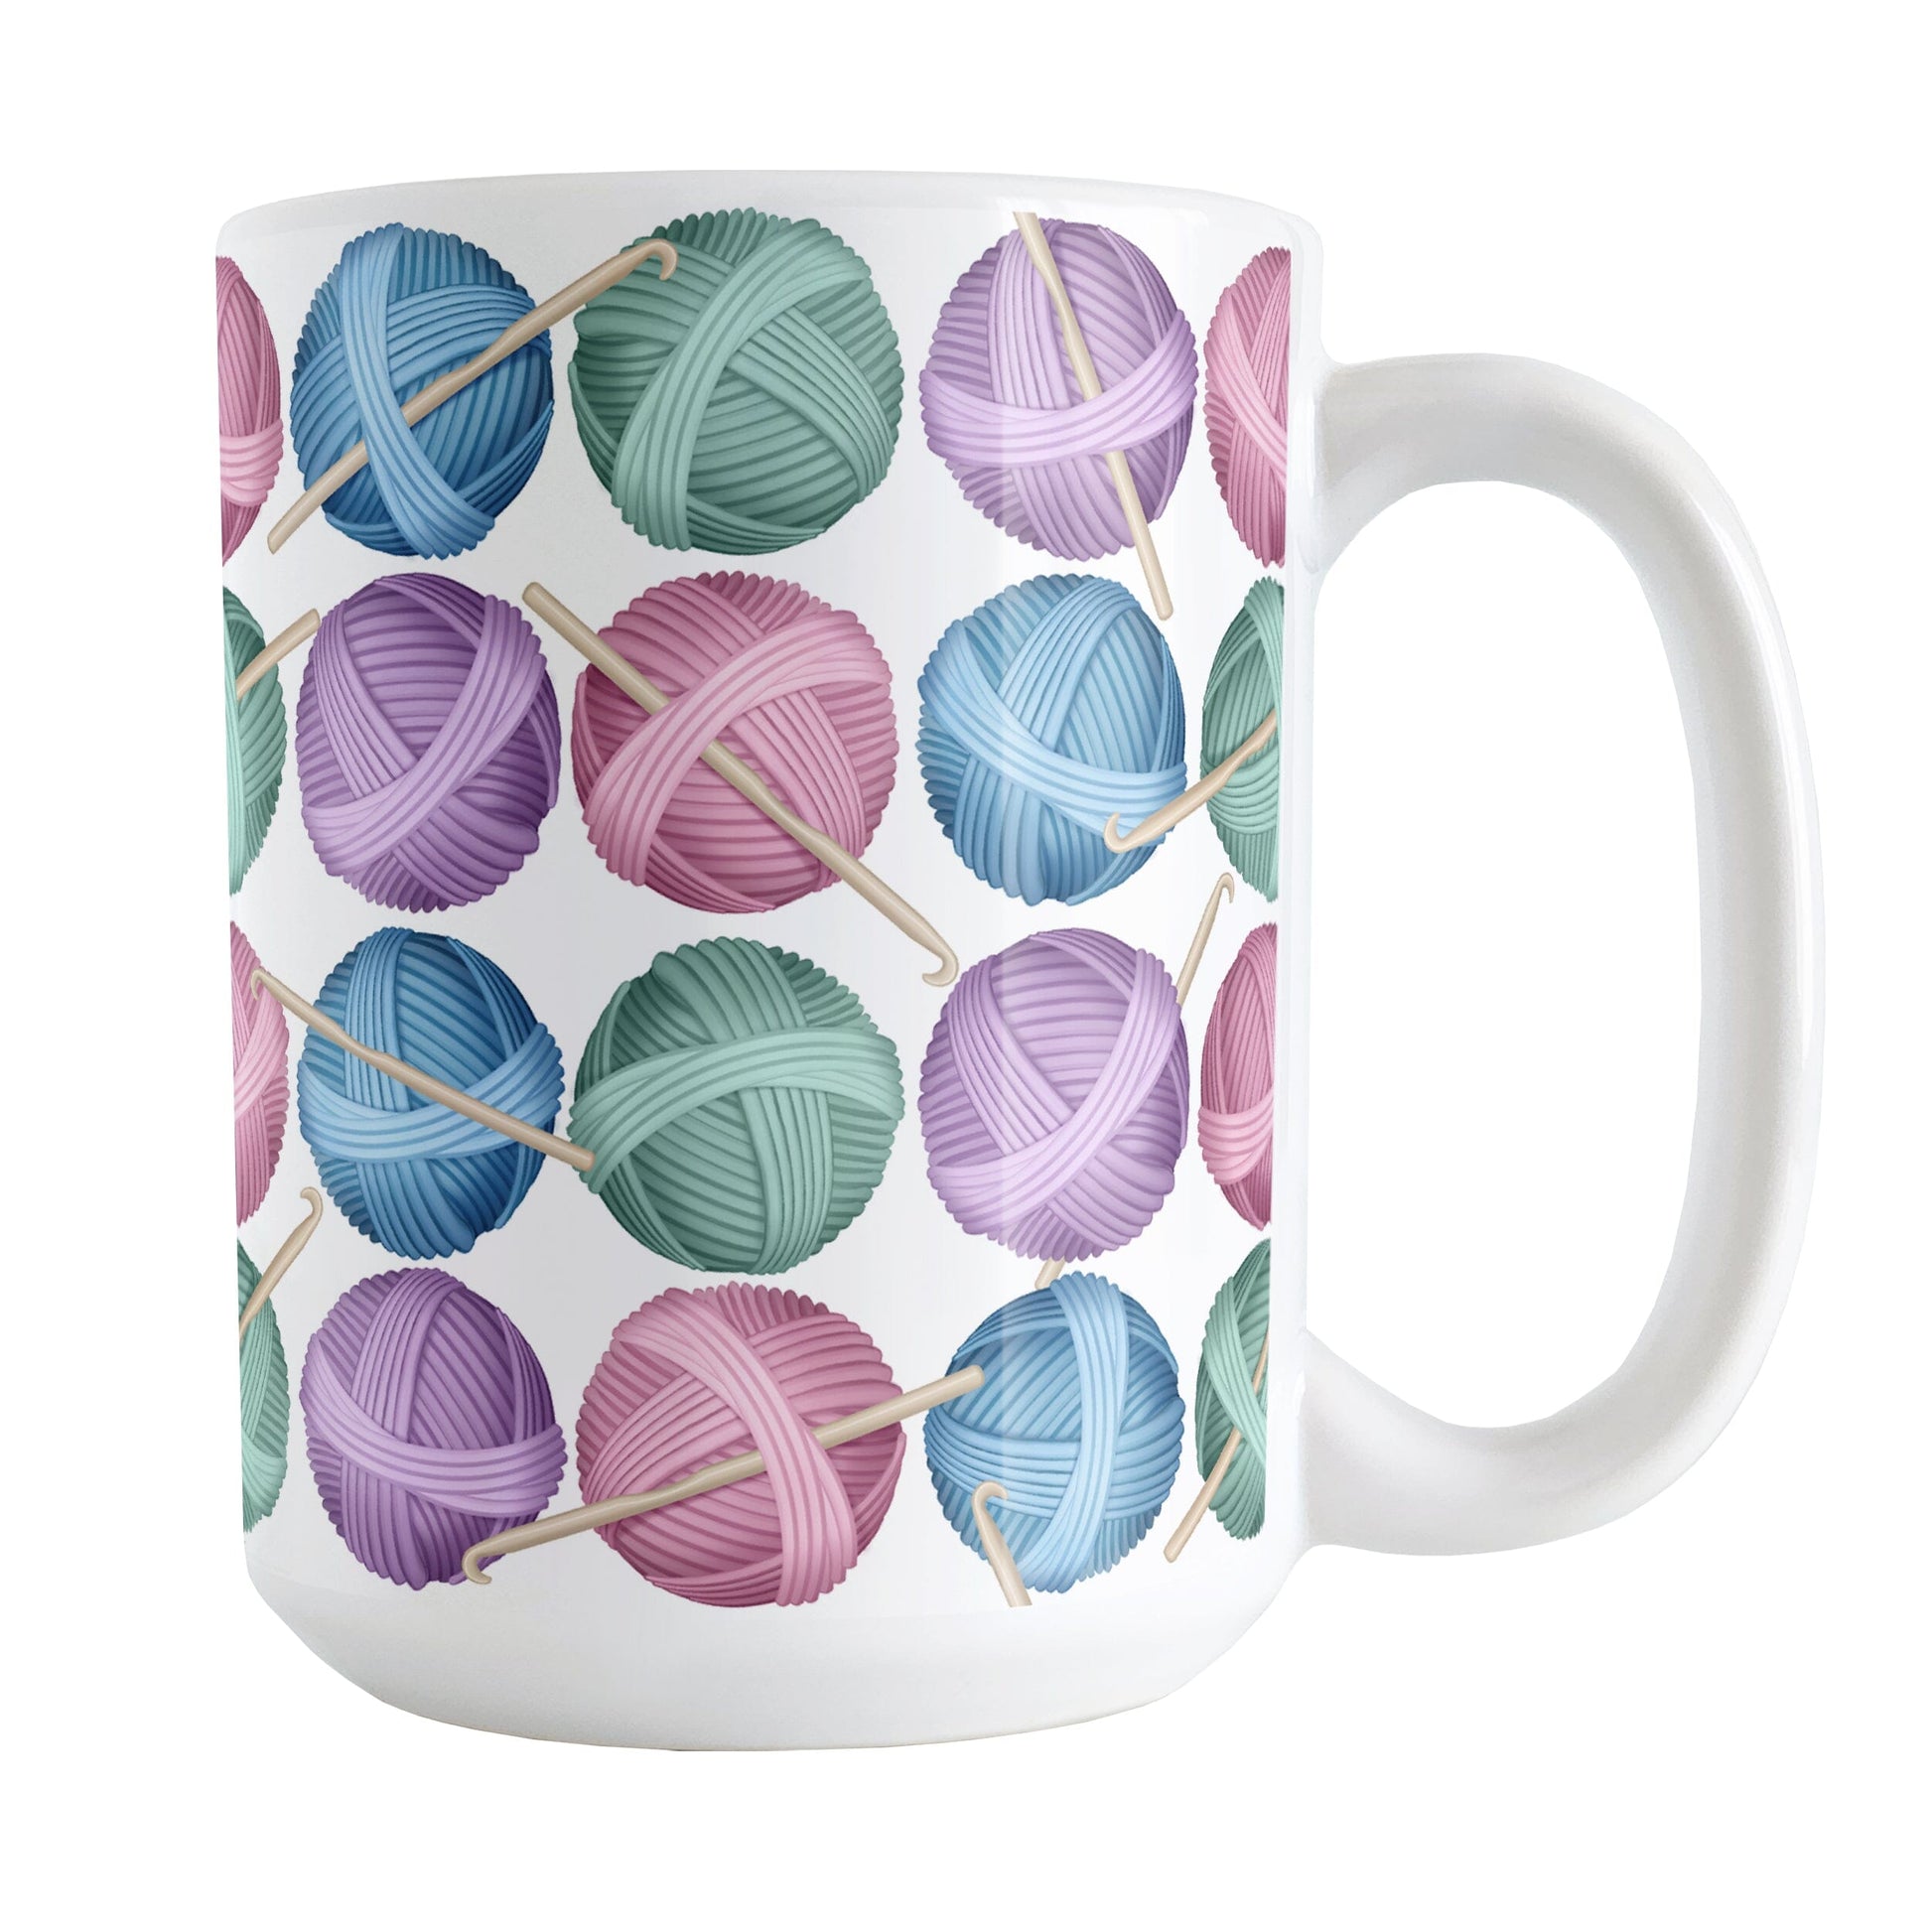 Crochet Yarn Pattern Mug (15oz) at Amy's Coffee Mugs. A ceramic coffee mug designed with colorful balls of yarn in blue, pink, purple, and mint green with crochet hooks in a pattern that wraps around the mug up to the handle. 